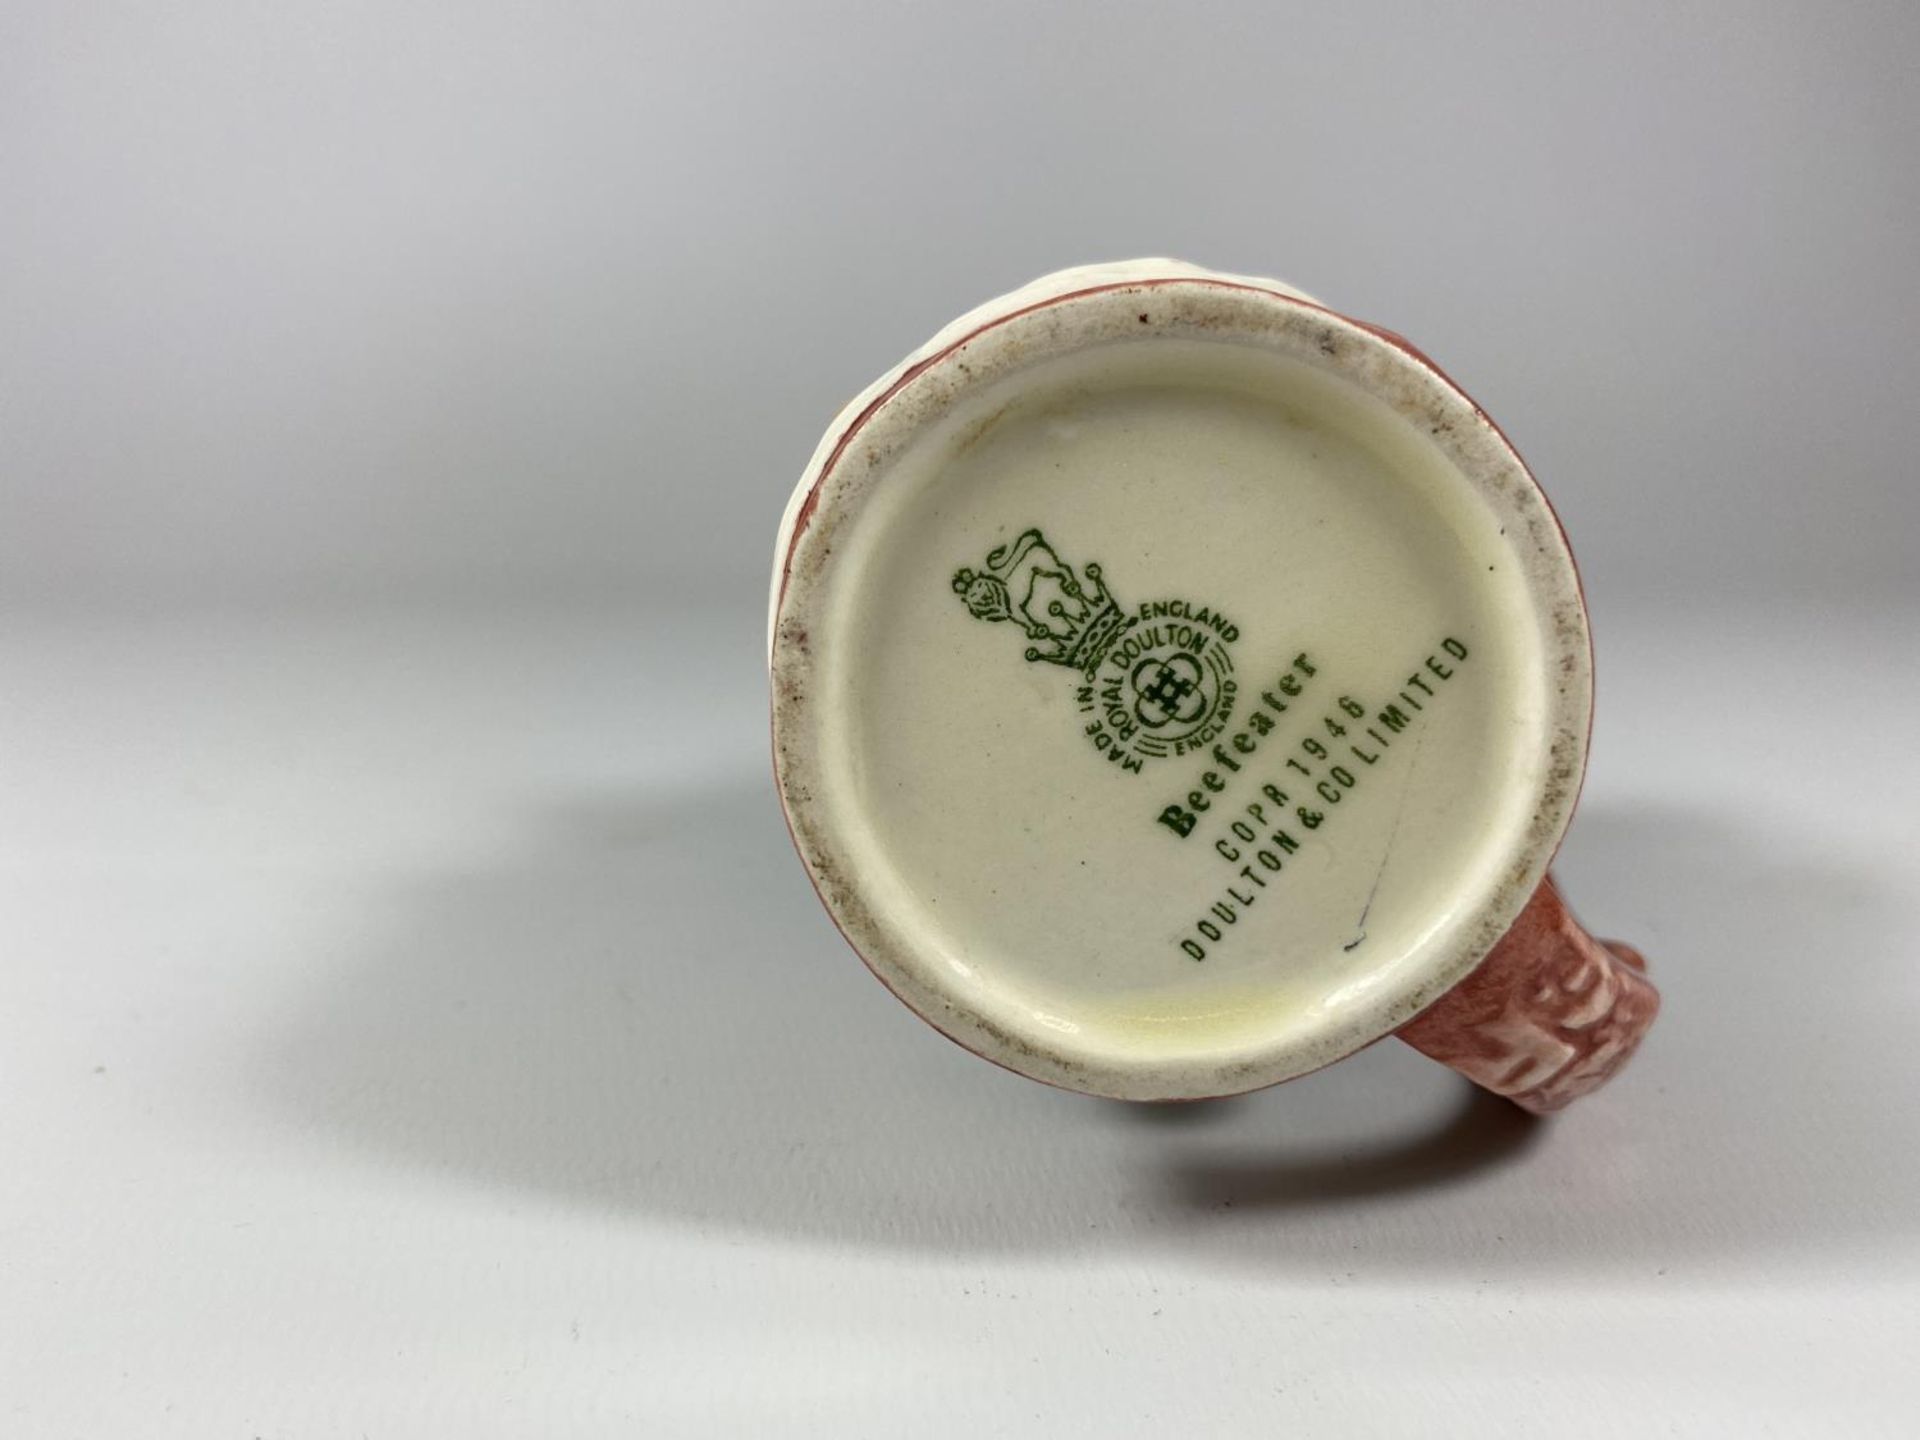 A ROYAL DOULTON BEEFEATER TABLE LIGHTER - Image 2 of 2